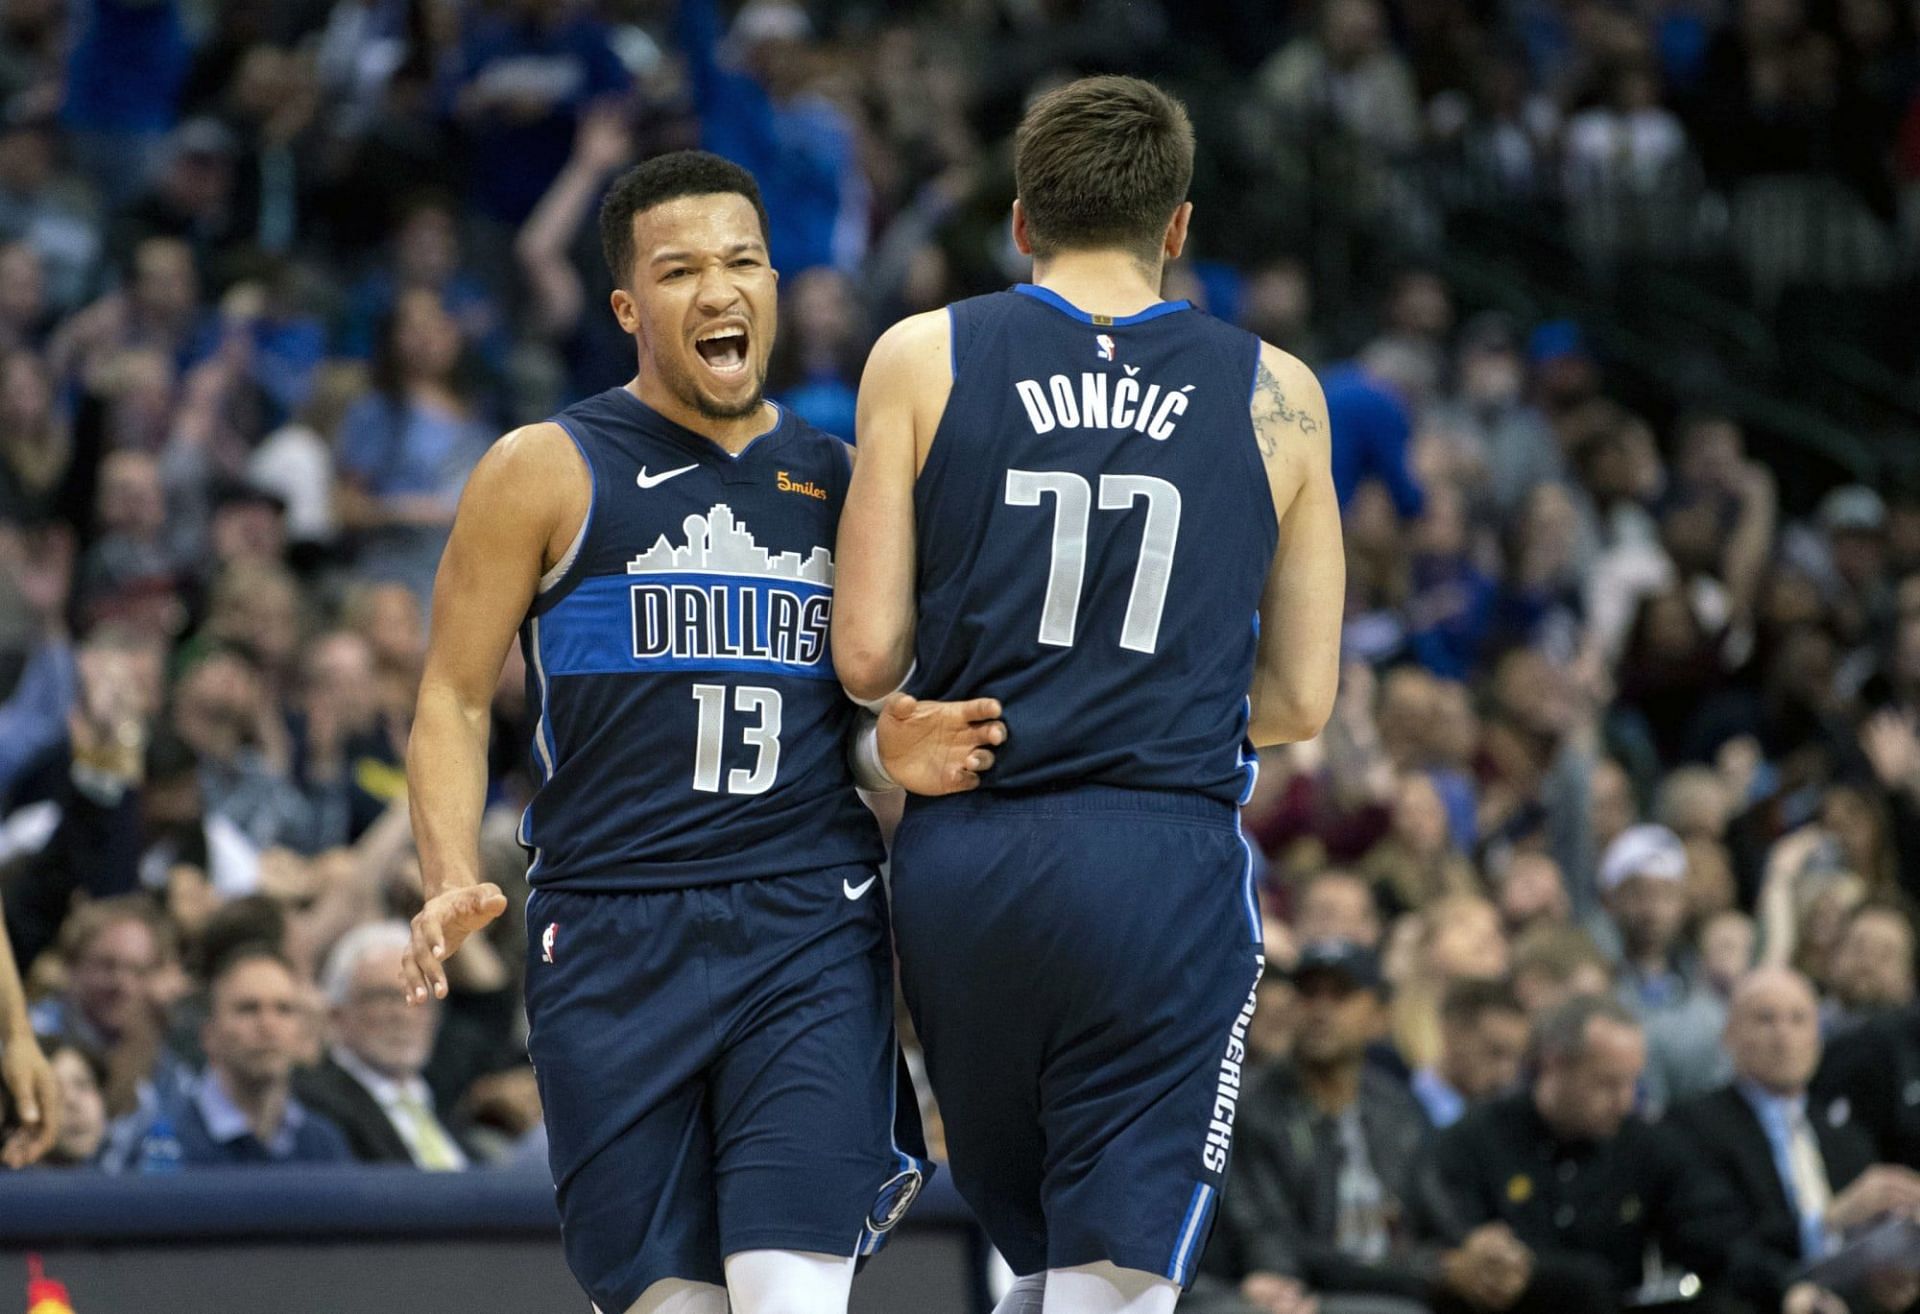 Jalen Brunson and Luka Doncic have been stellar all year long for the Dallas Mavericks. [Photo: FanSided]